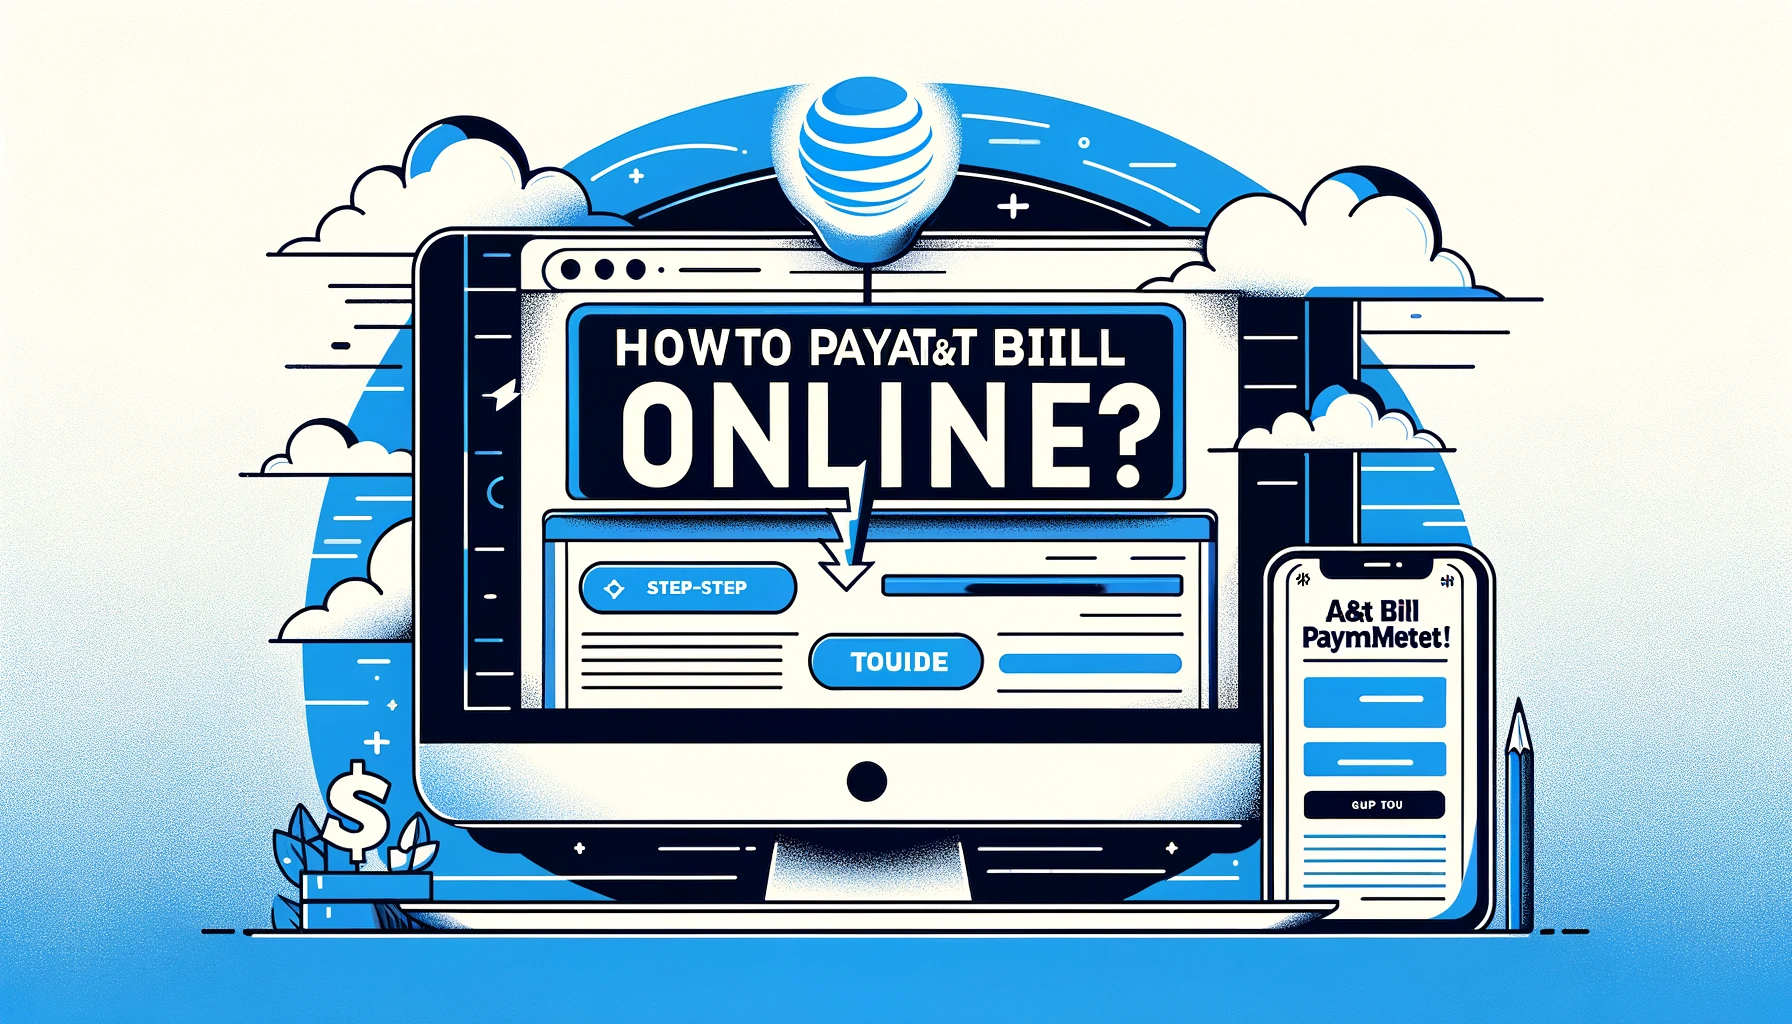 Featured image of an artice on How to Pay AT&T Bill Online